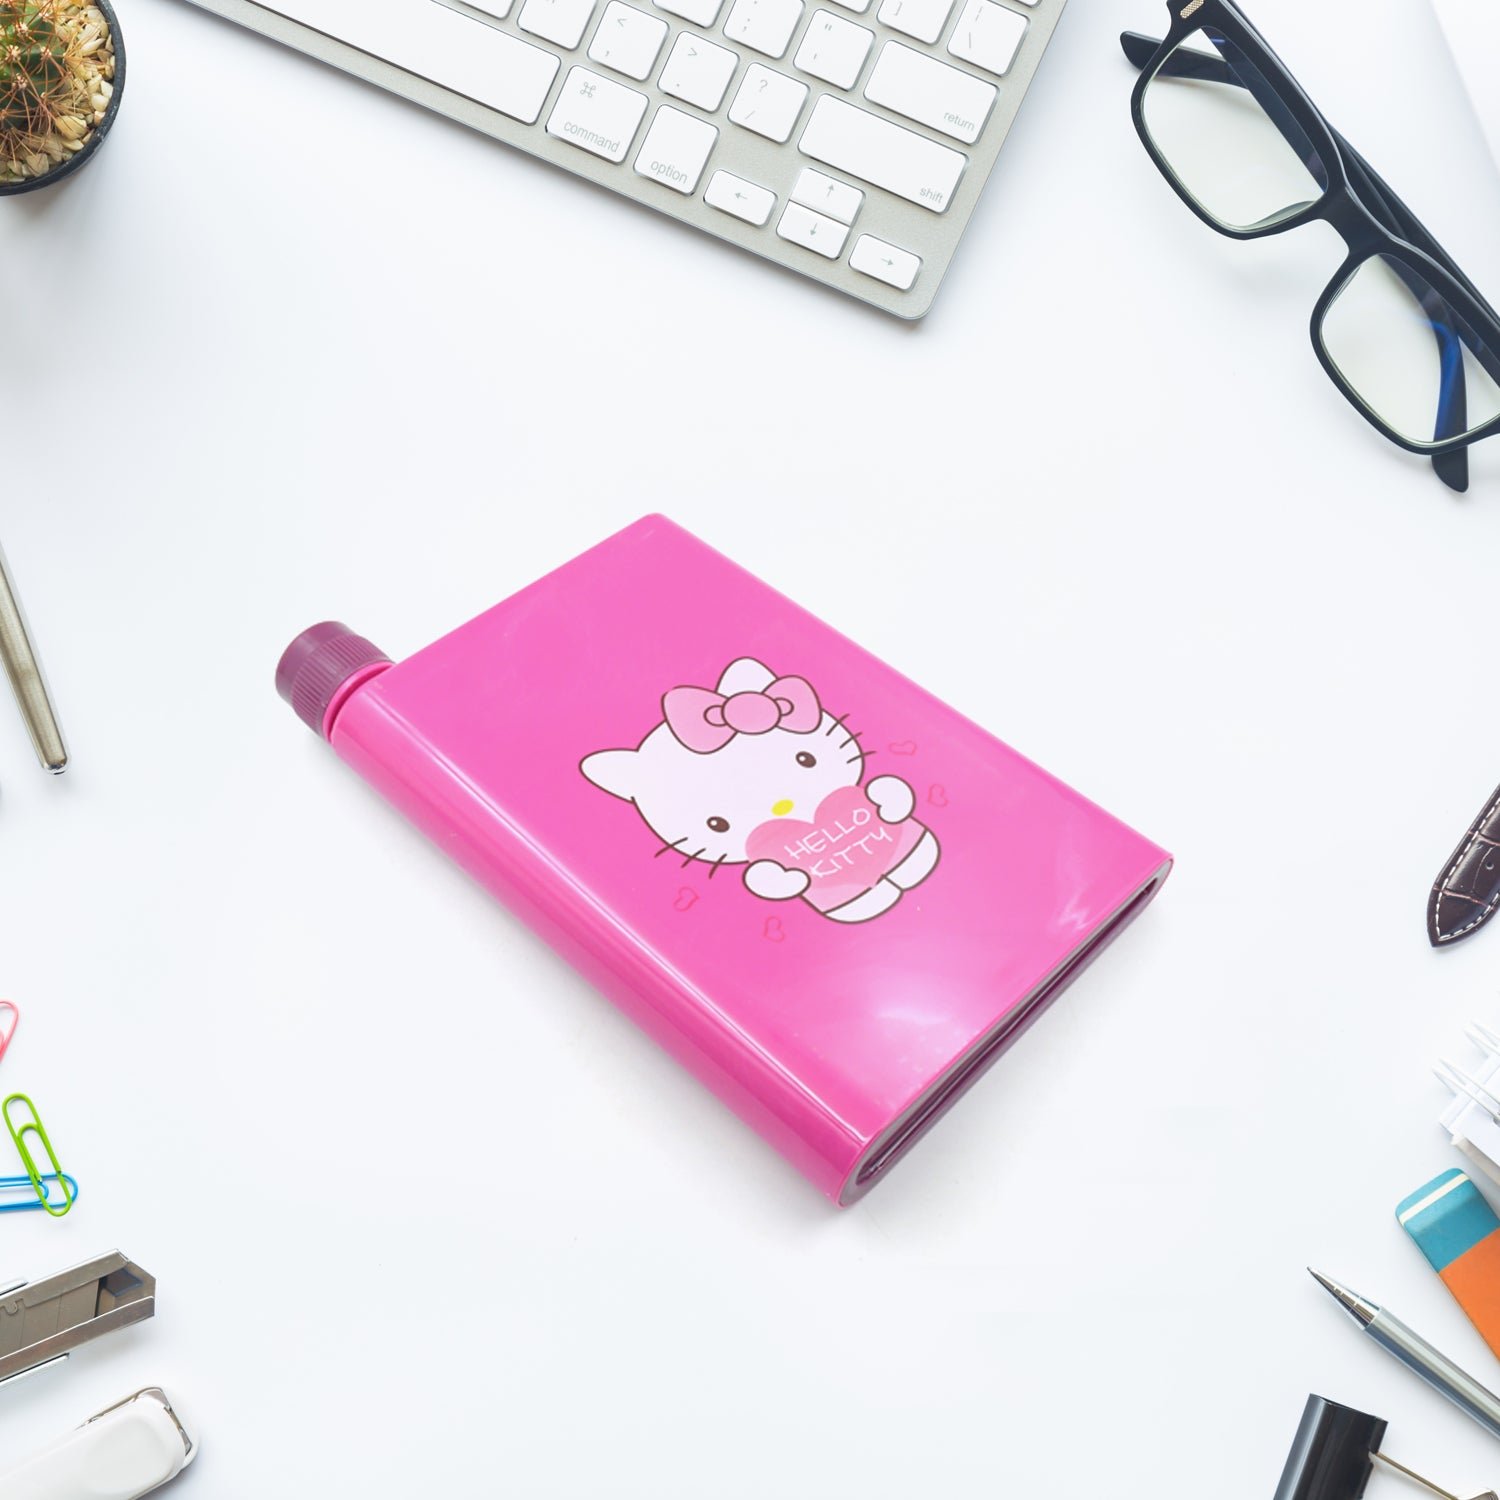 0147-kitchen-storage-a5-size-flat-portable-notebook-shape-water-bottle-with-a-cartoon-character-design-hello-kitty-for-school-outdoors-and-sports-return-gift-birthday-gift-1-pc-420ml